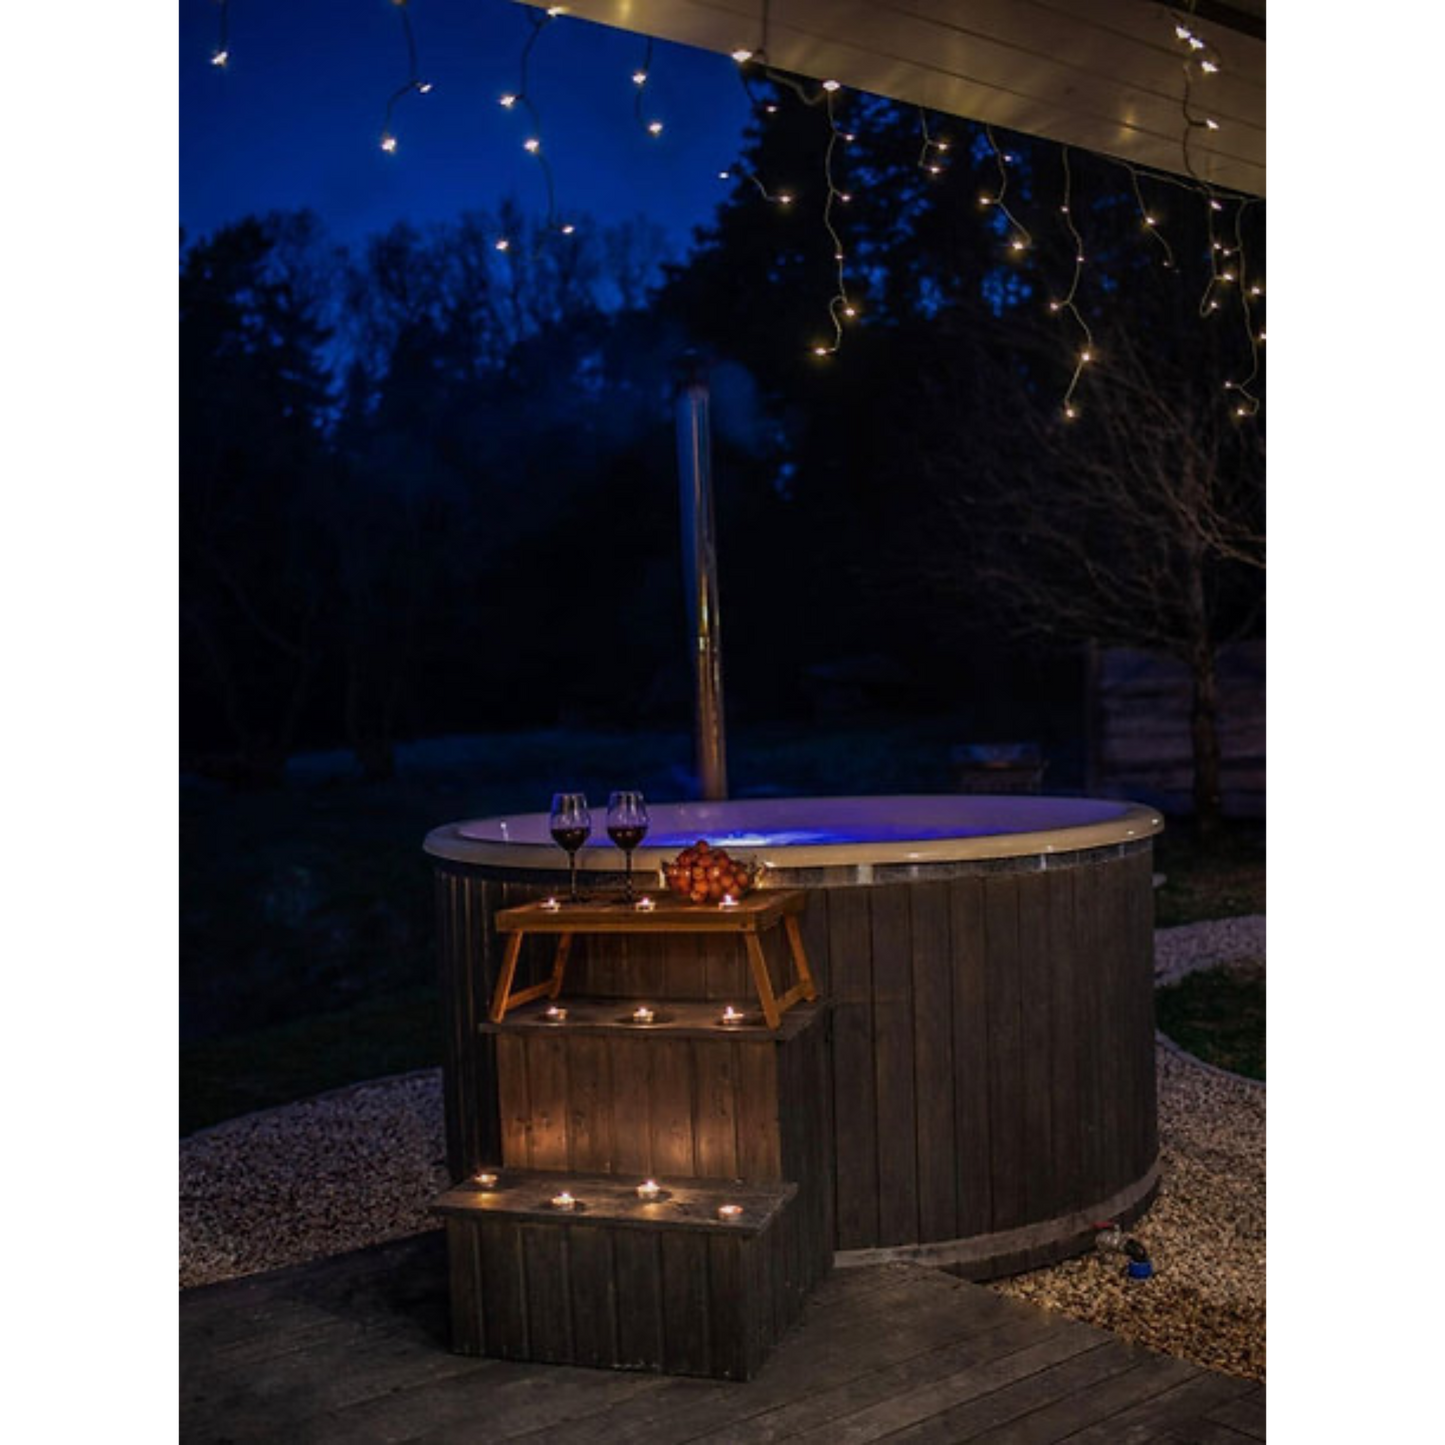 Ofuro 6-8 Person External Square Wood Fired Hot Tub - Deluxe